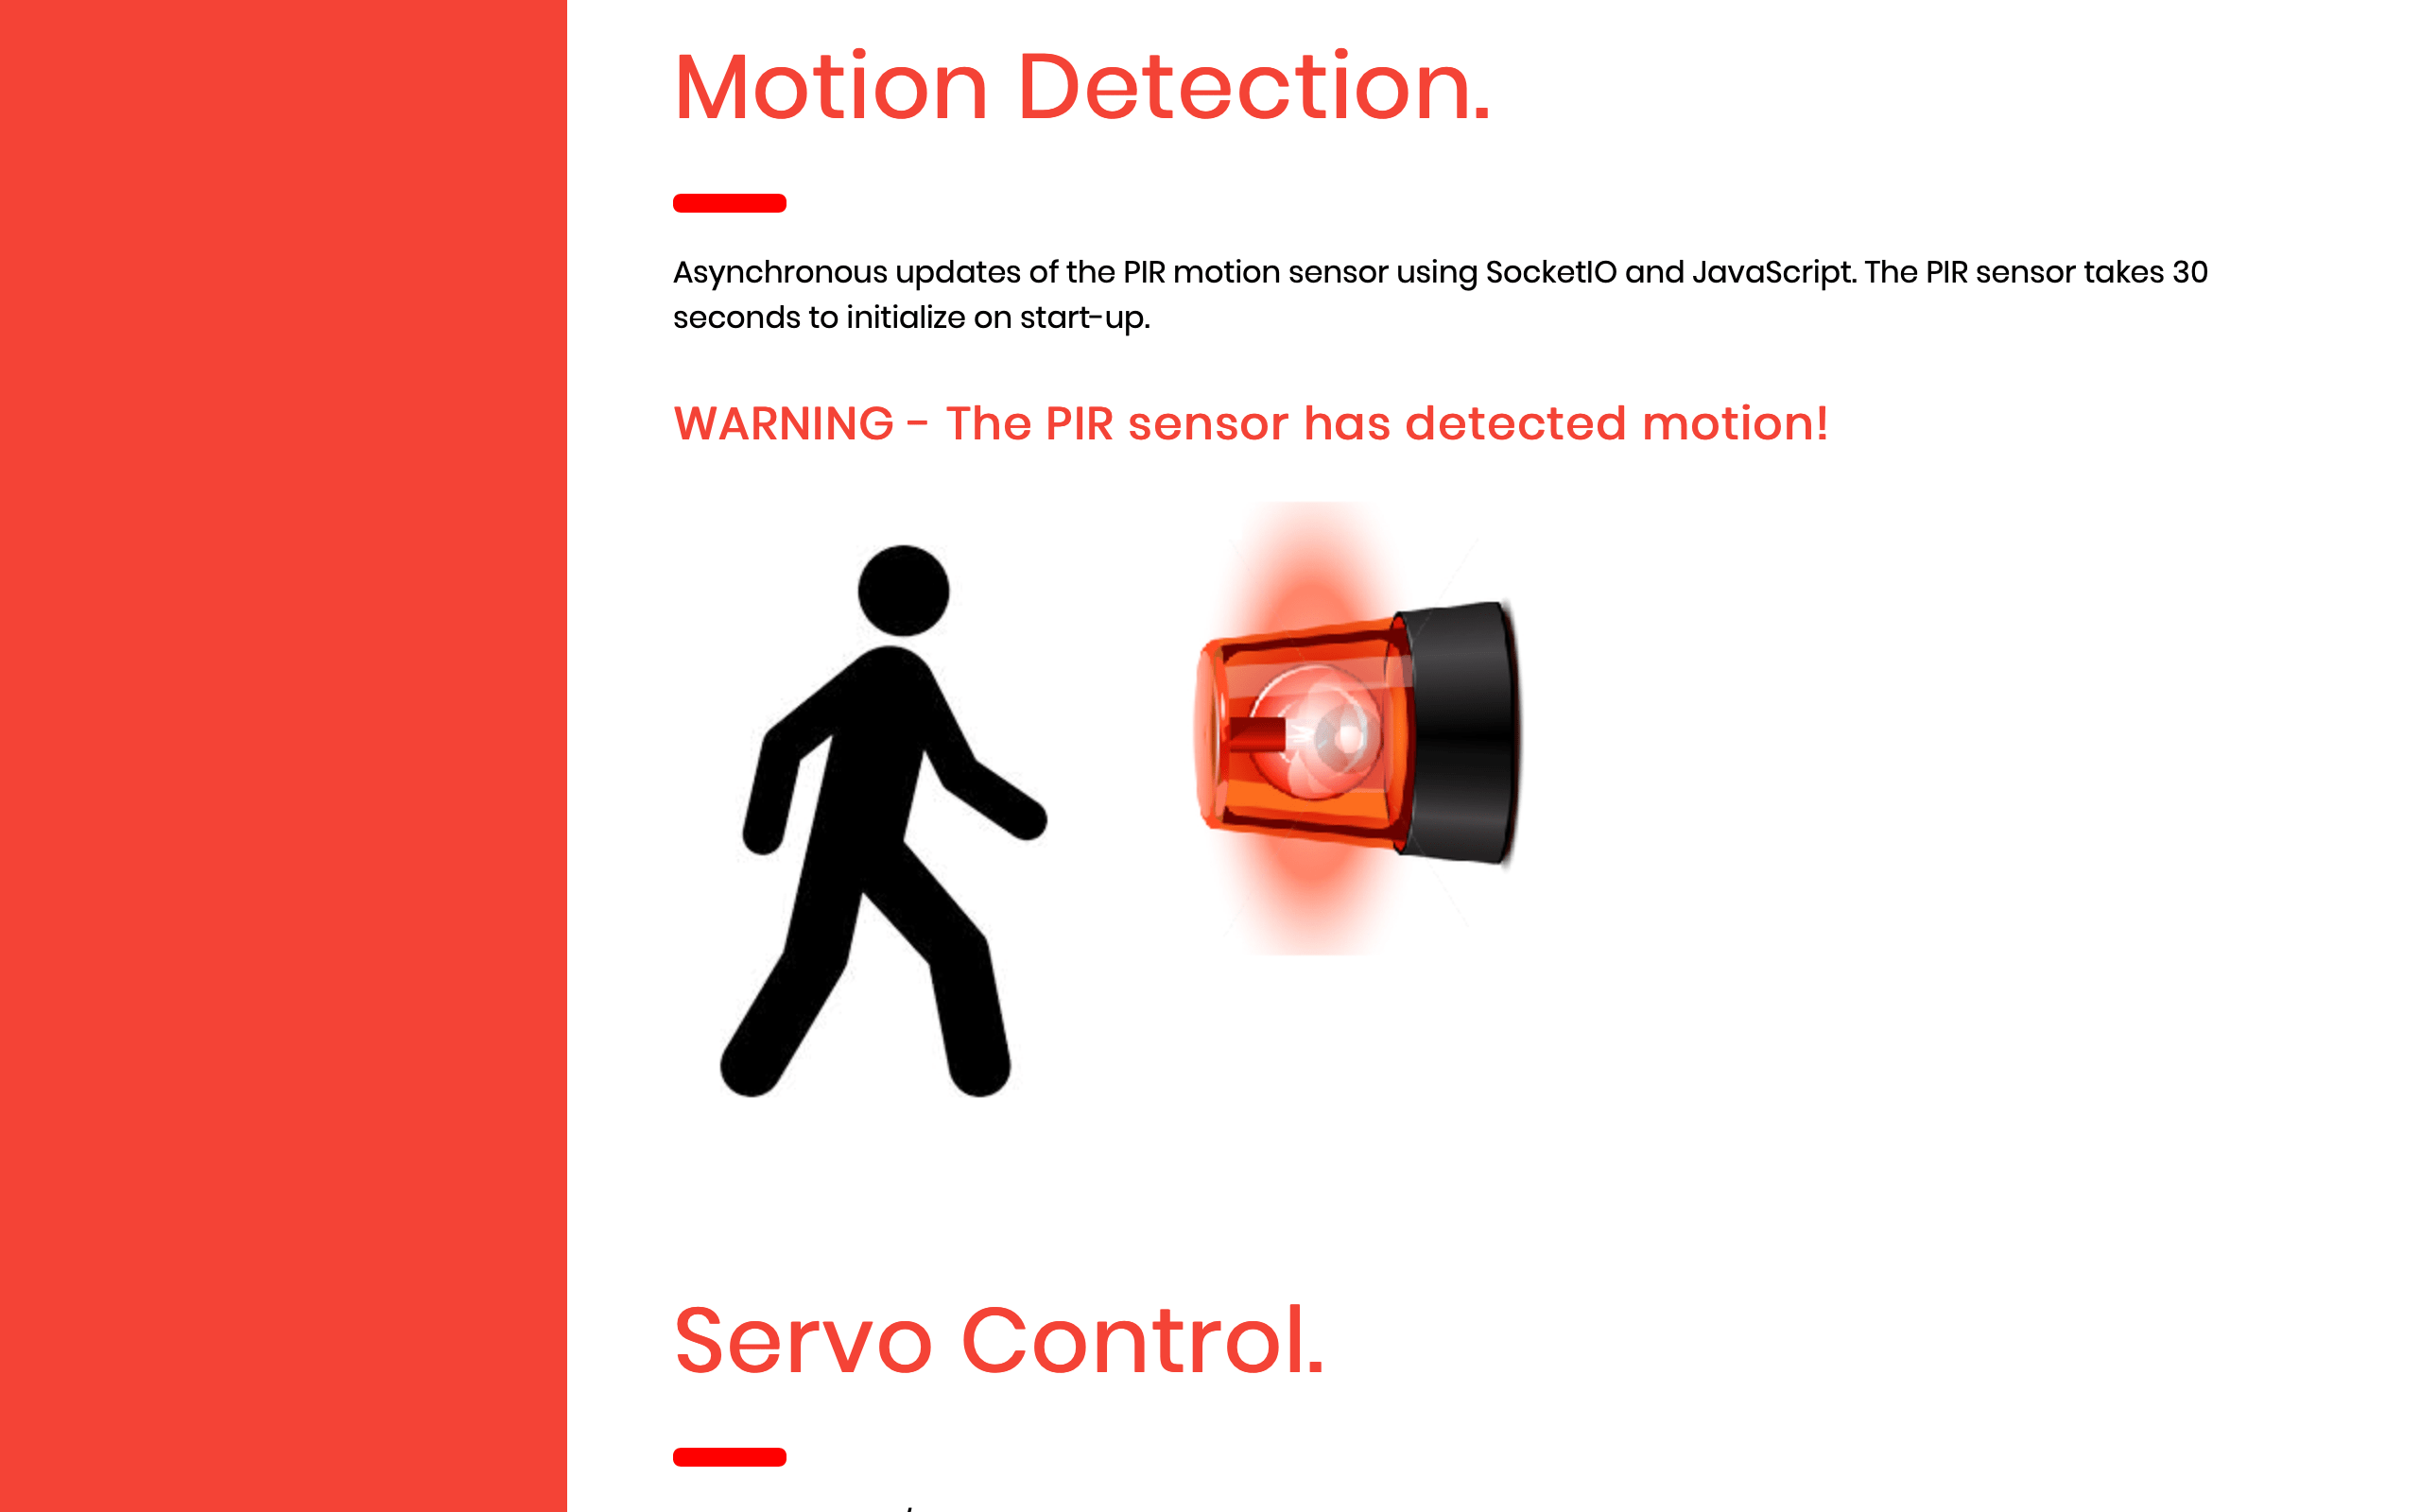 Web interface with motion detected